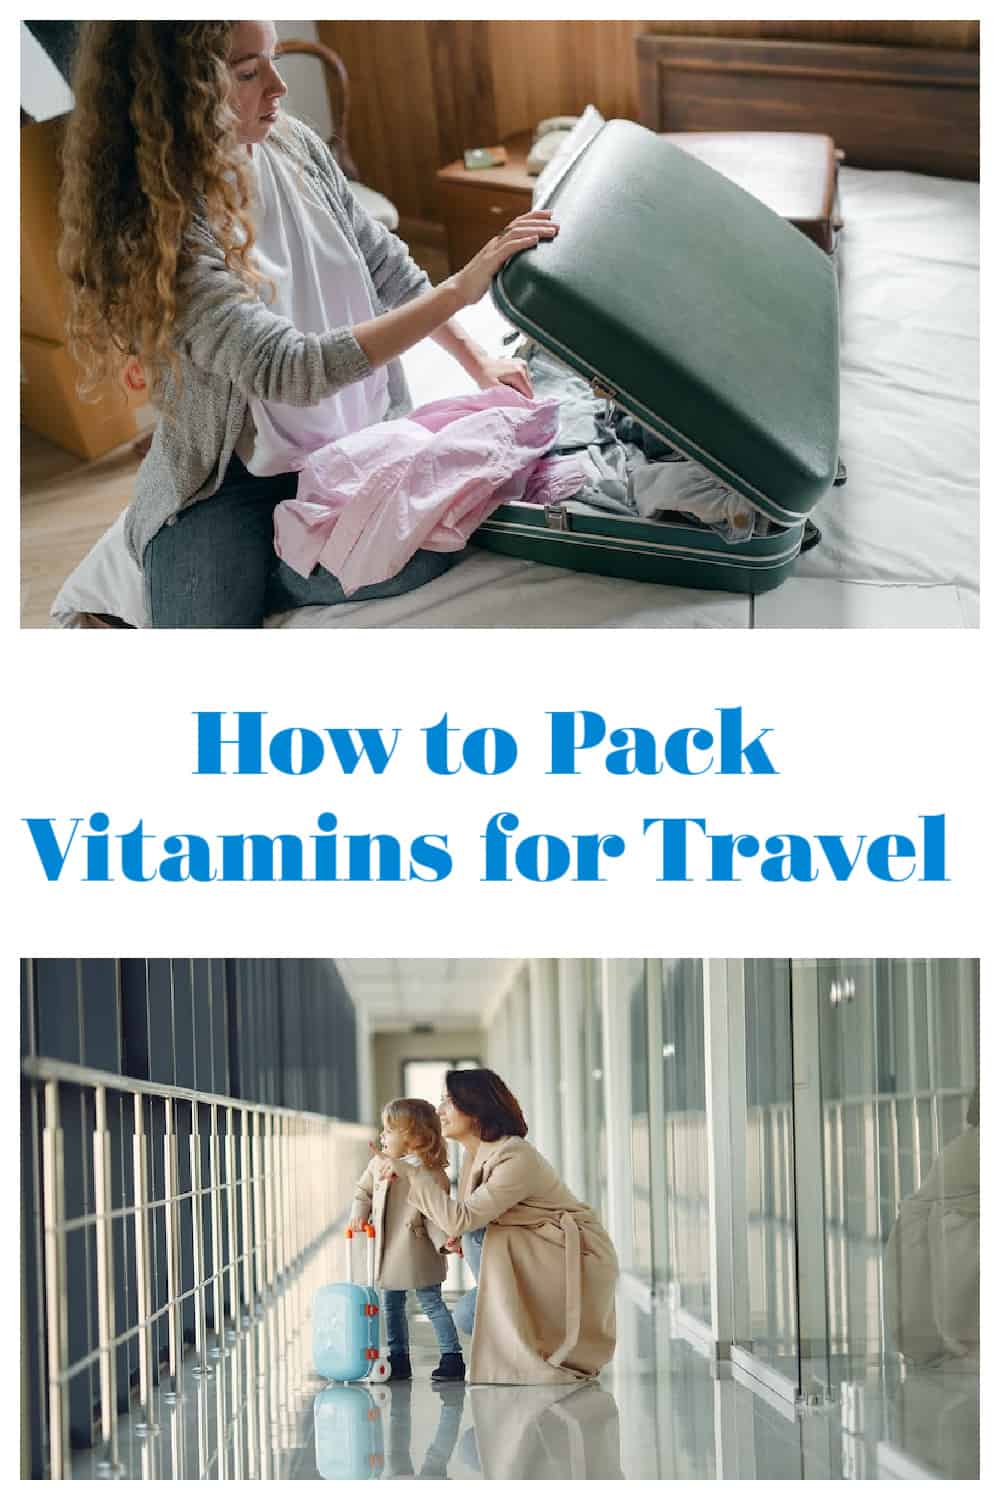 Wondering how to pack vitamins to travel? Check out these tips to take vitamins on a plane and why you should consider meltable vitamins for your whole family.